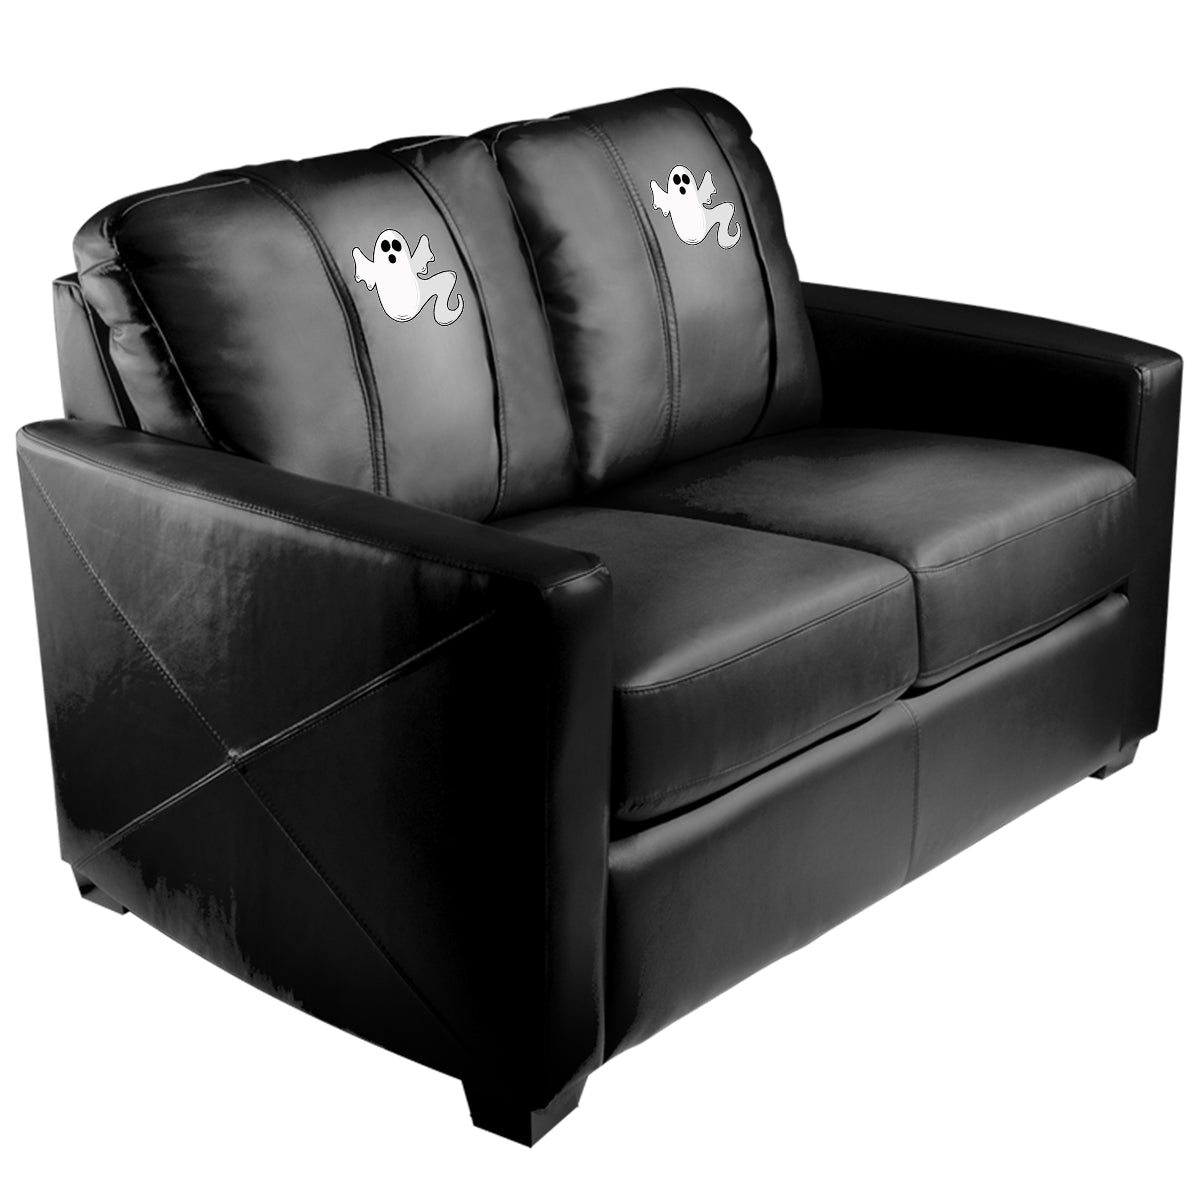 Silver Loveseat with Zippy The Ghost Logo